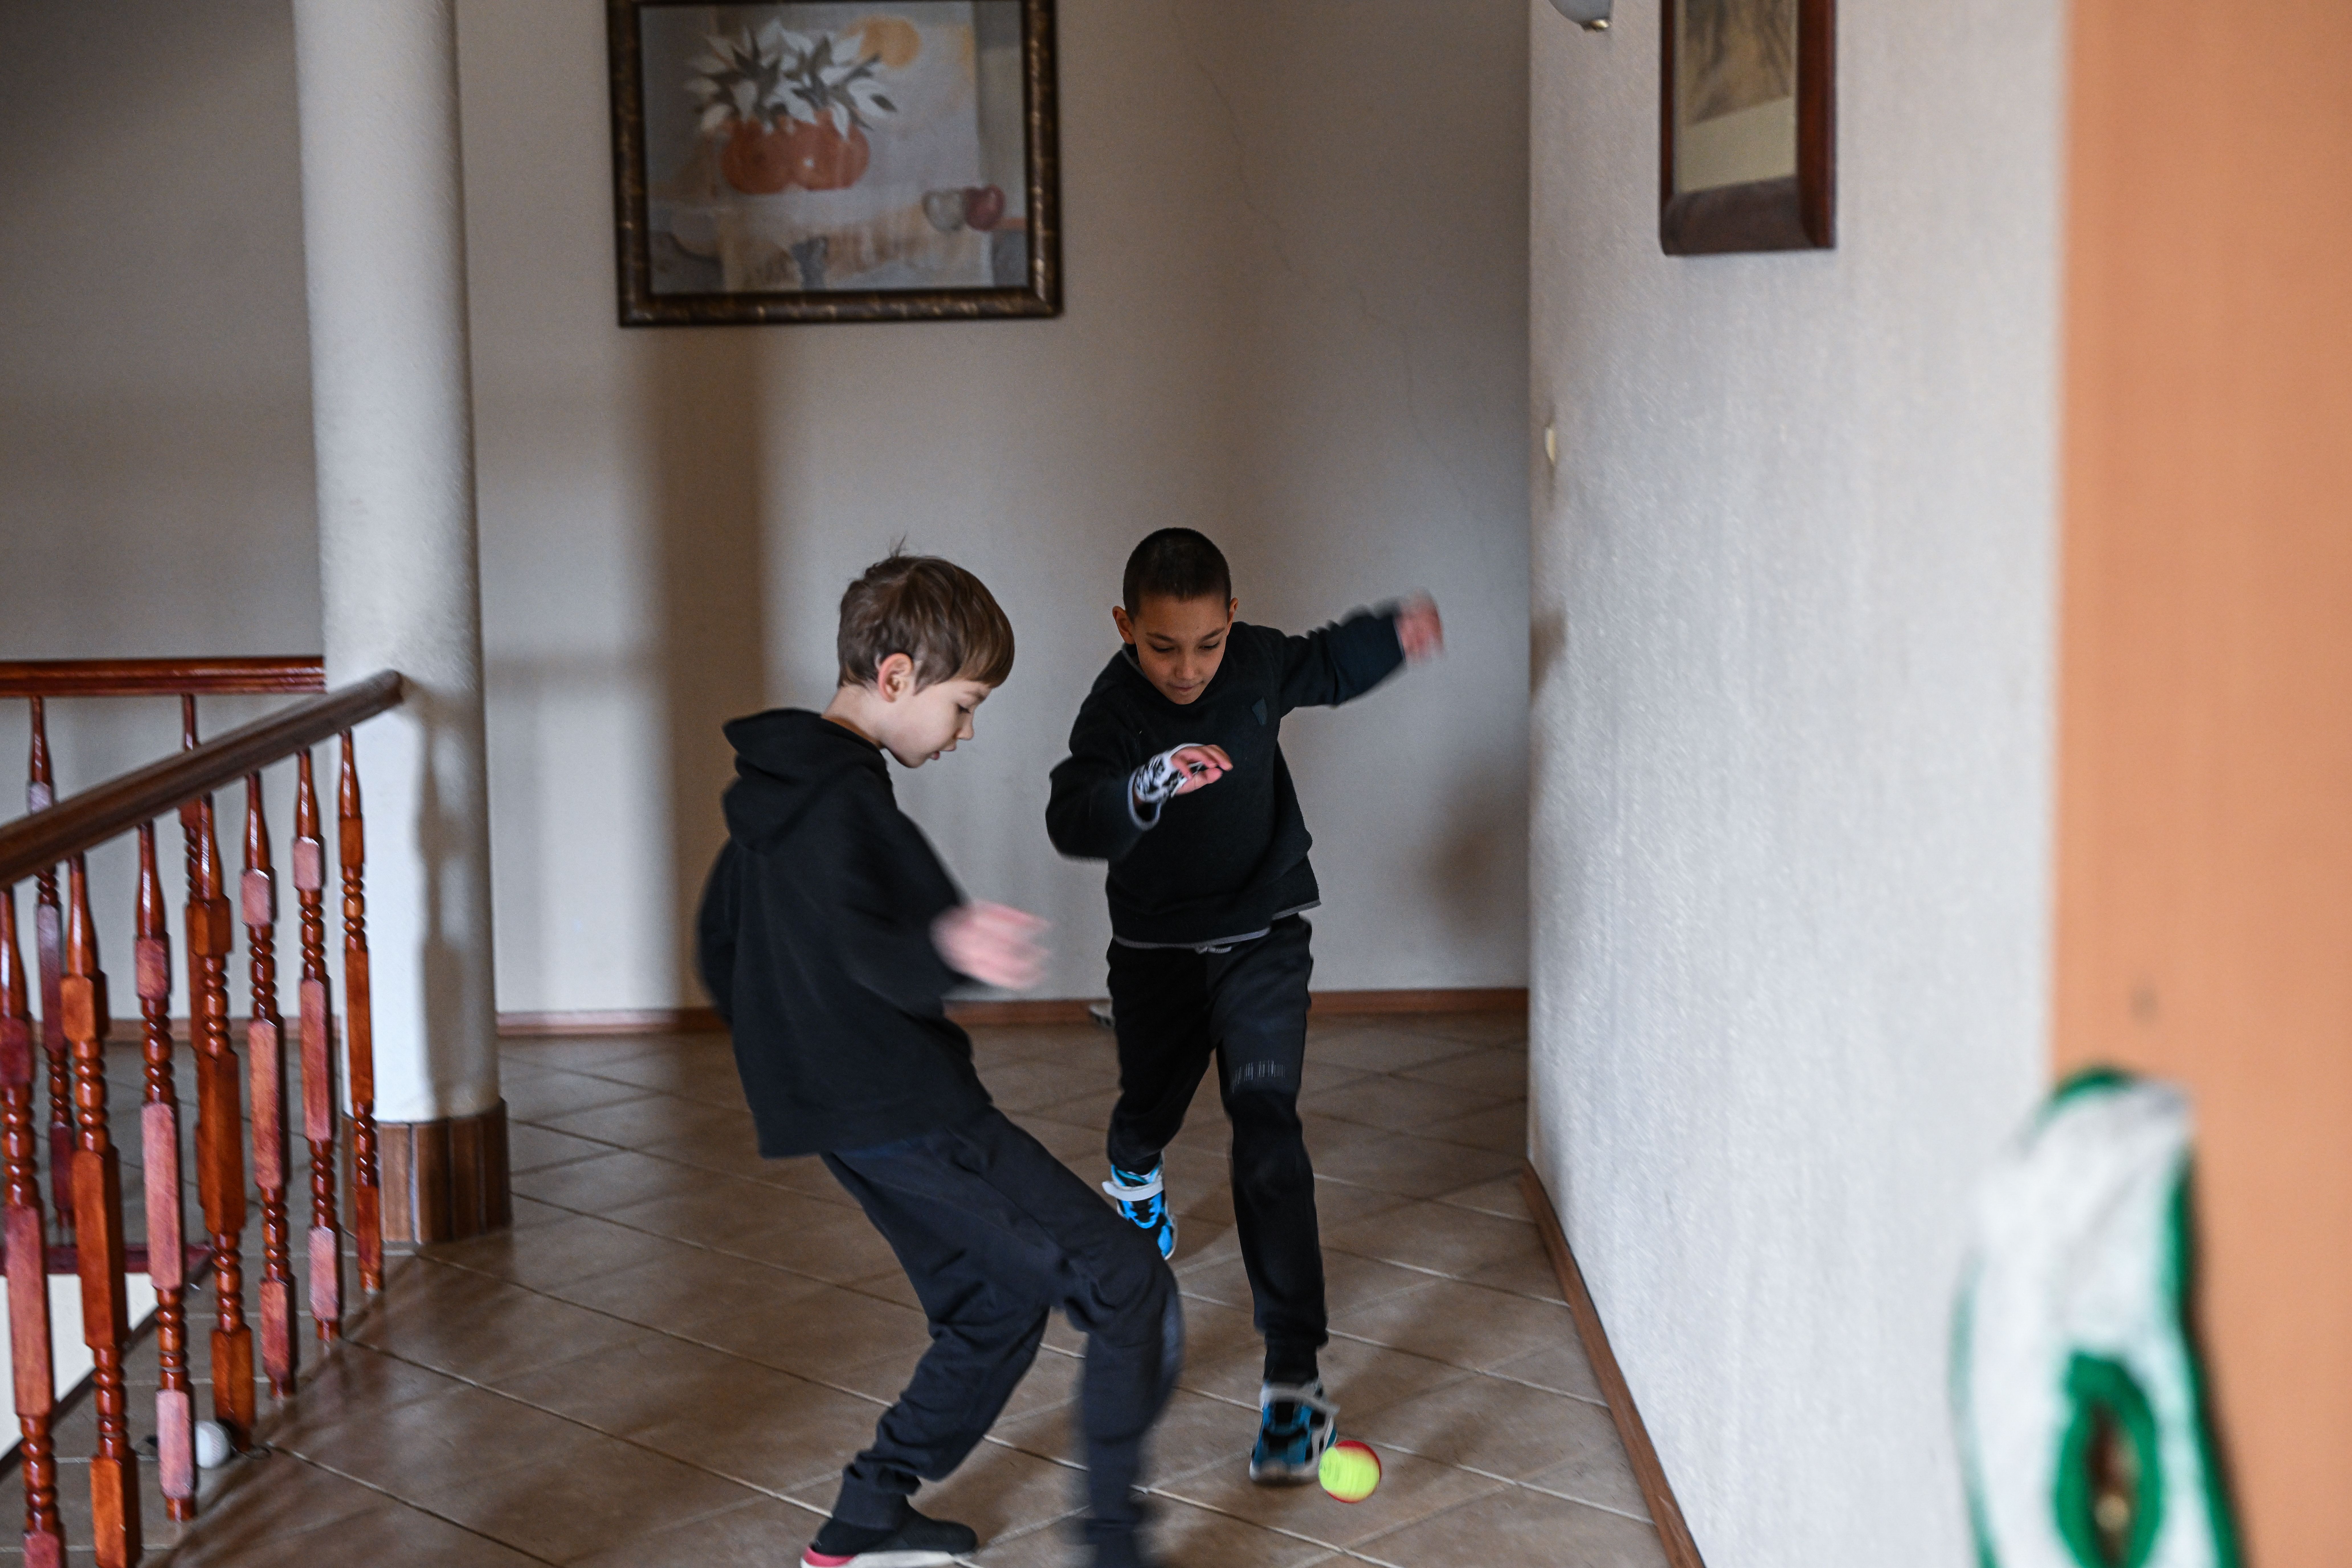 Children who fled the war in Ukraine with their mothers play with a ball on the corridors of the Green Hotel on February 23, 2023 in Jerzmanowice, Poland